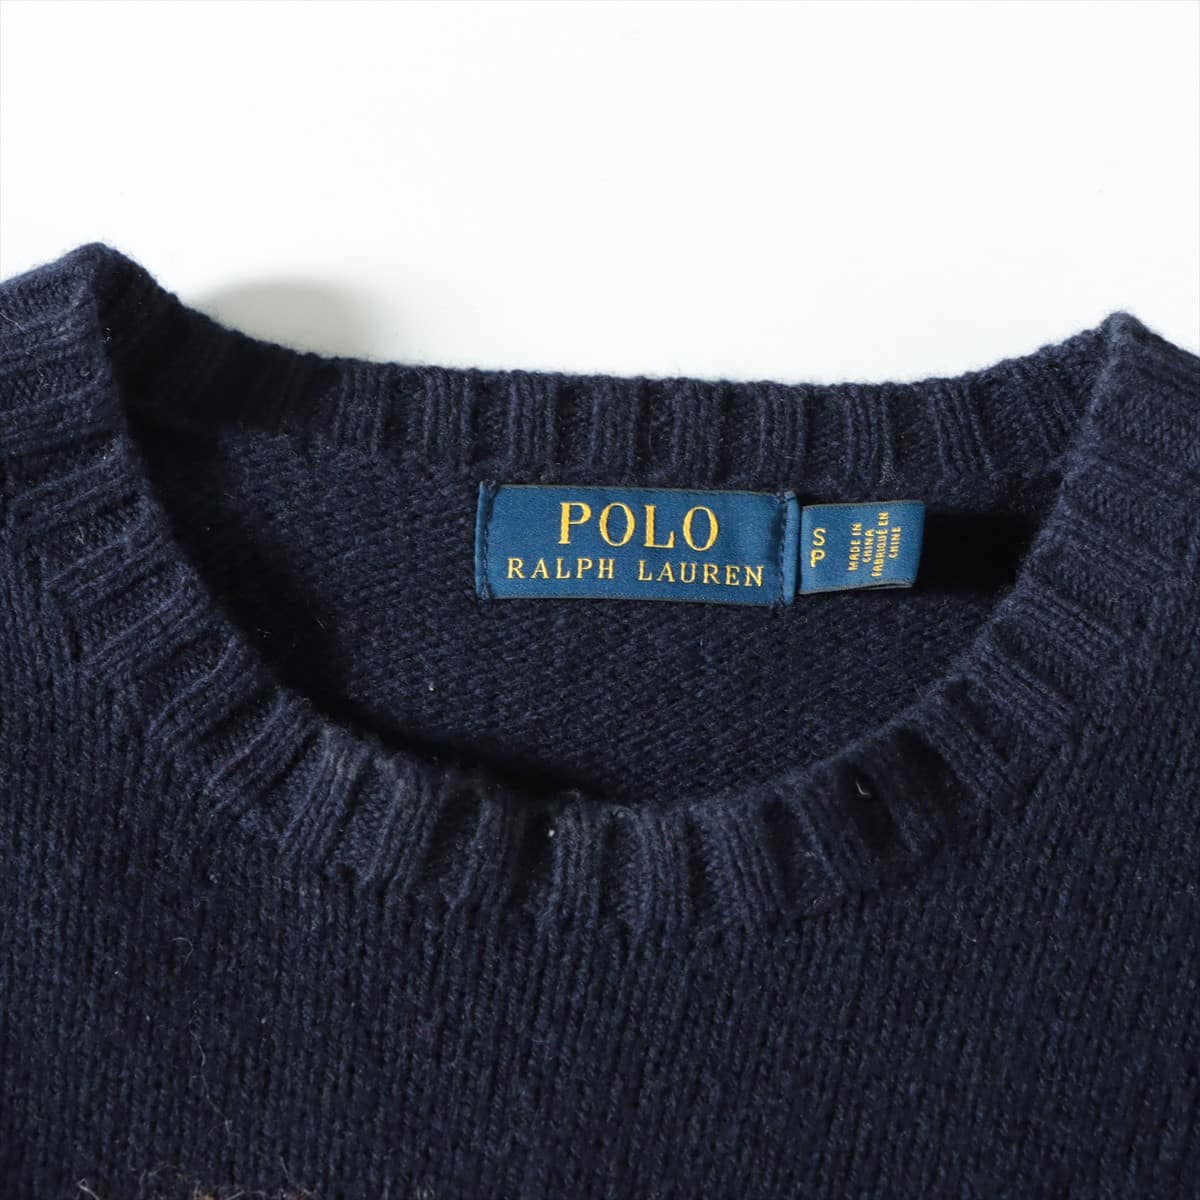 Polo Ralph Lauren Wool Sweater S Men's Navy blue  Polo bear Cut part of the tag